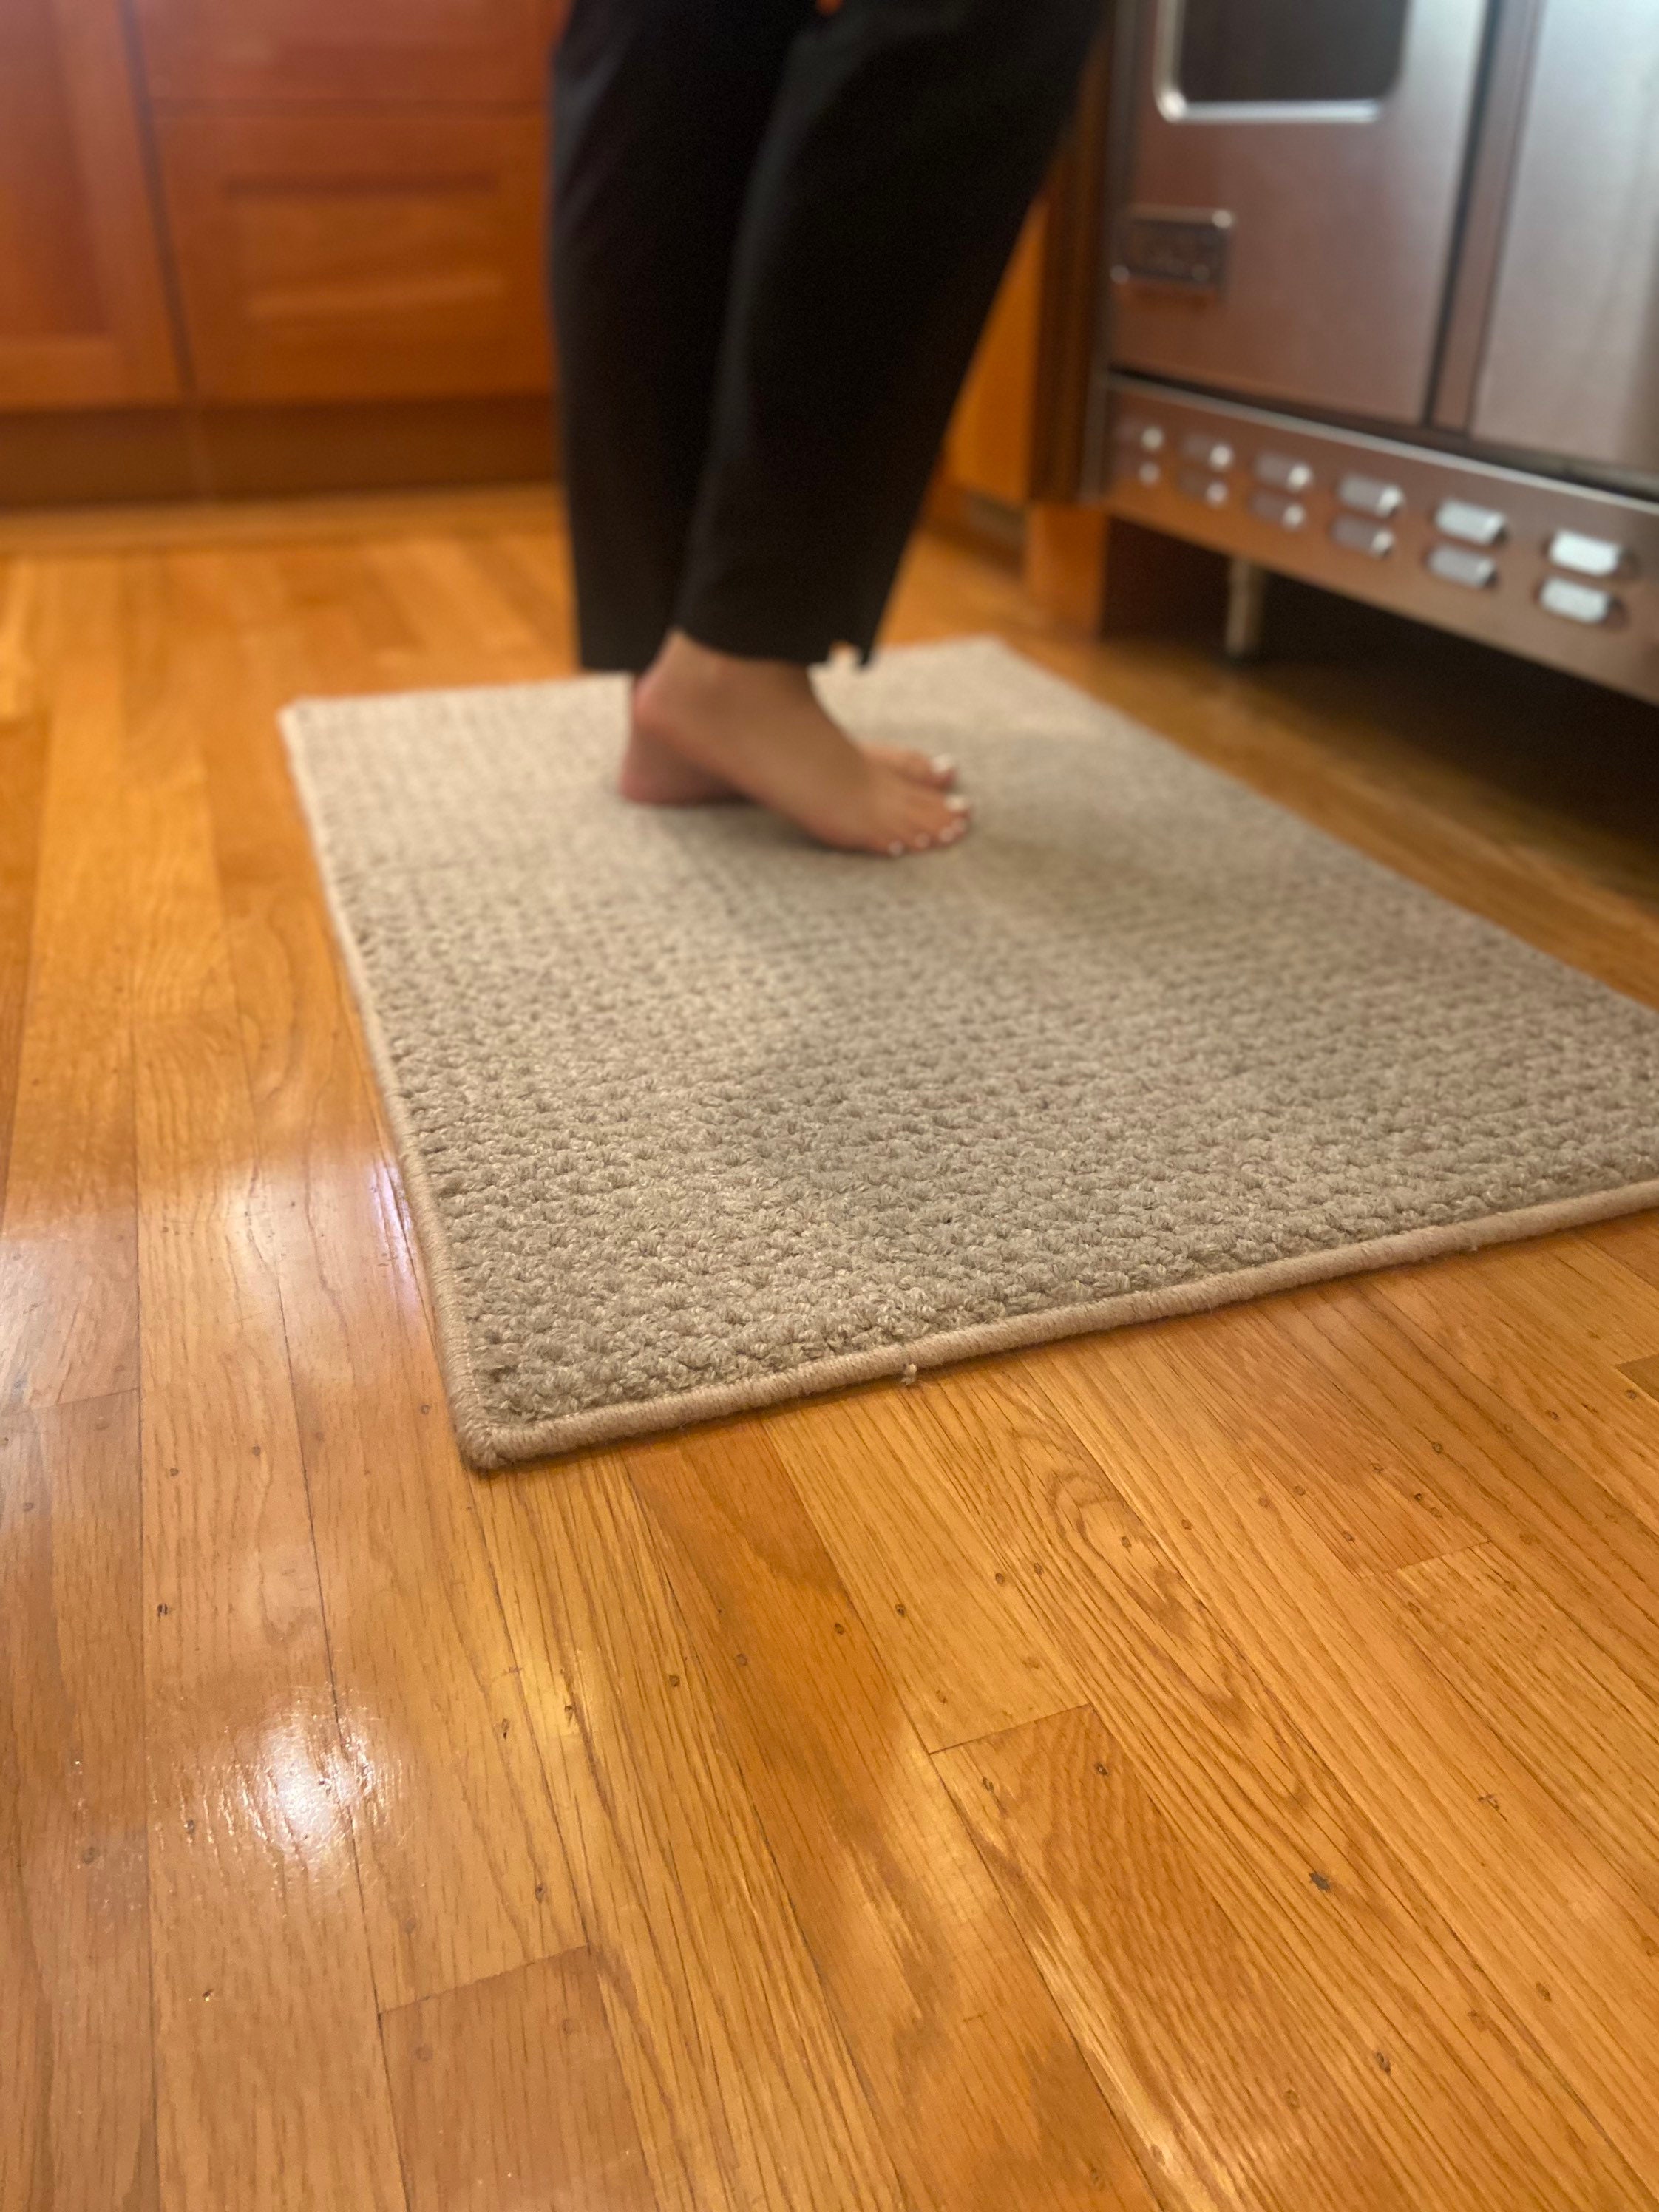 PedMats-Individualized, Portable Pair of Anti-Fatigue Mats for Standing  Desk, Thick and Ergonomically Cushioned Support, Compact, Easy to Move,  Easy